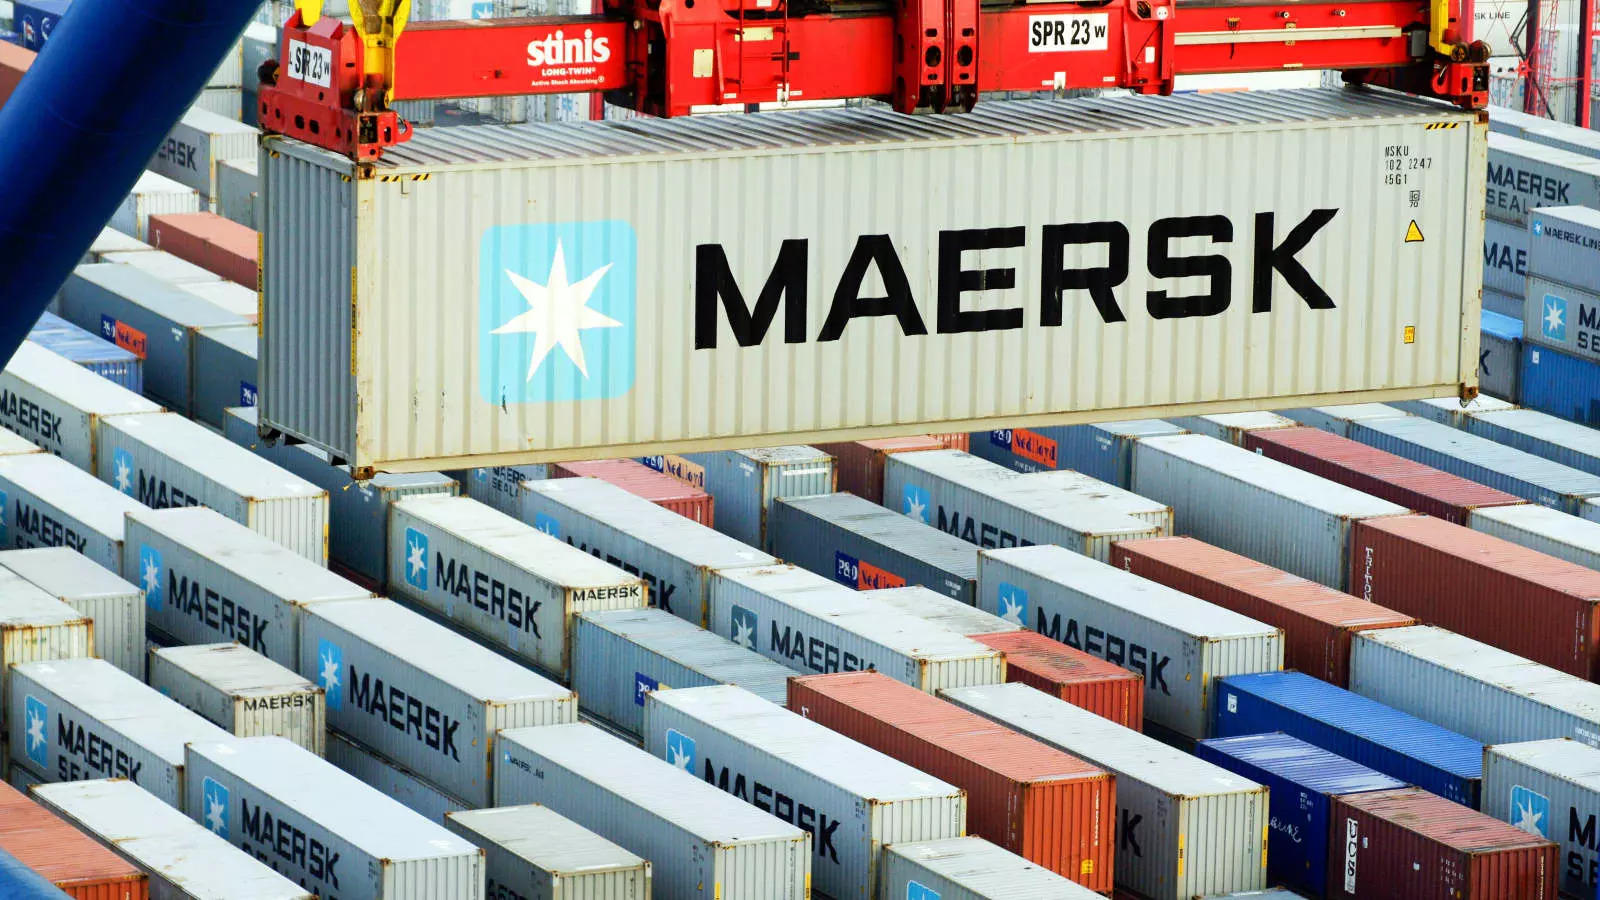  Maersk's targets are approved by the Science-Based Targets Initiative, an independent body that checks goals are robust.